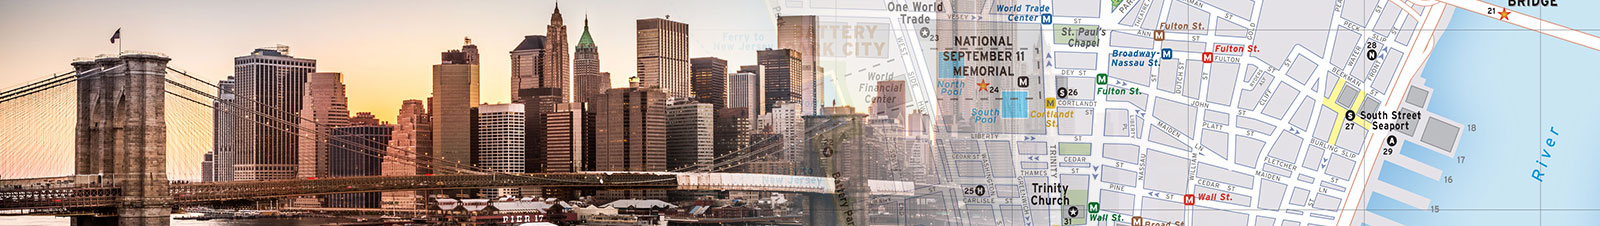 Travel map header featuring a photo collage of new york with a map